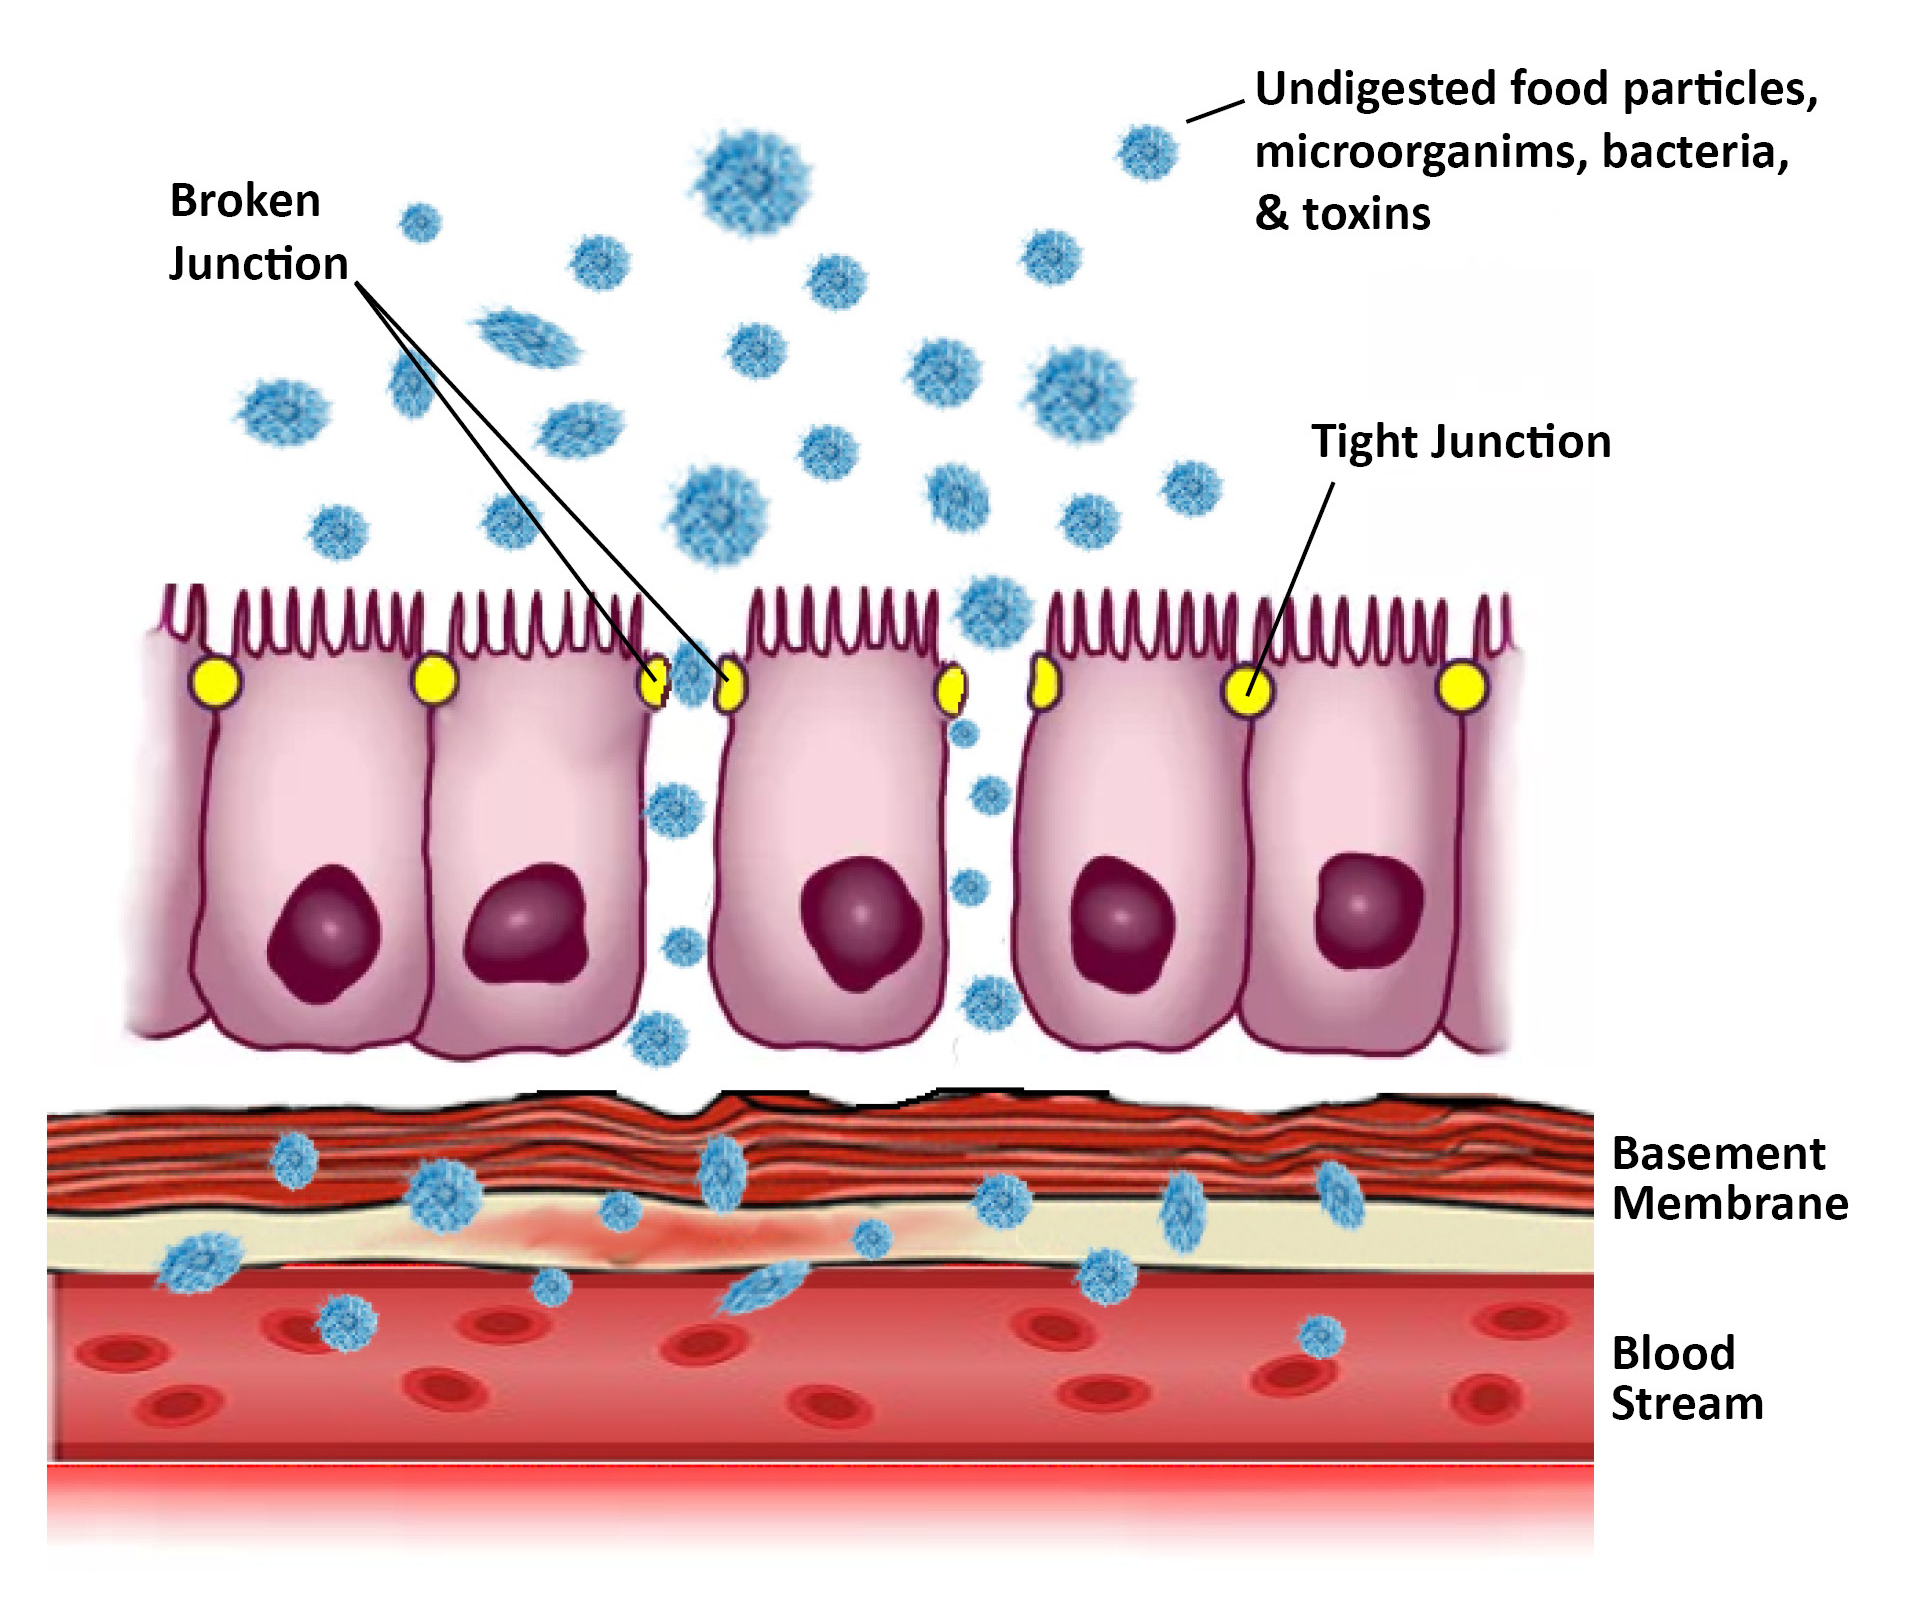 IgG Antibodies to foods may be suggestive of Leaky Gut syndrome